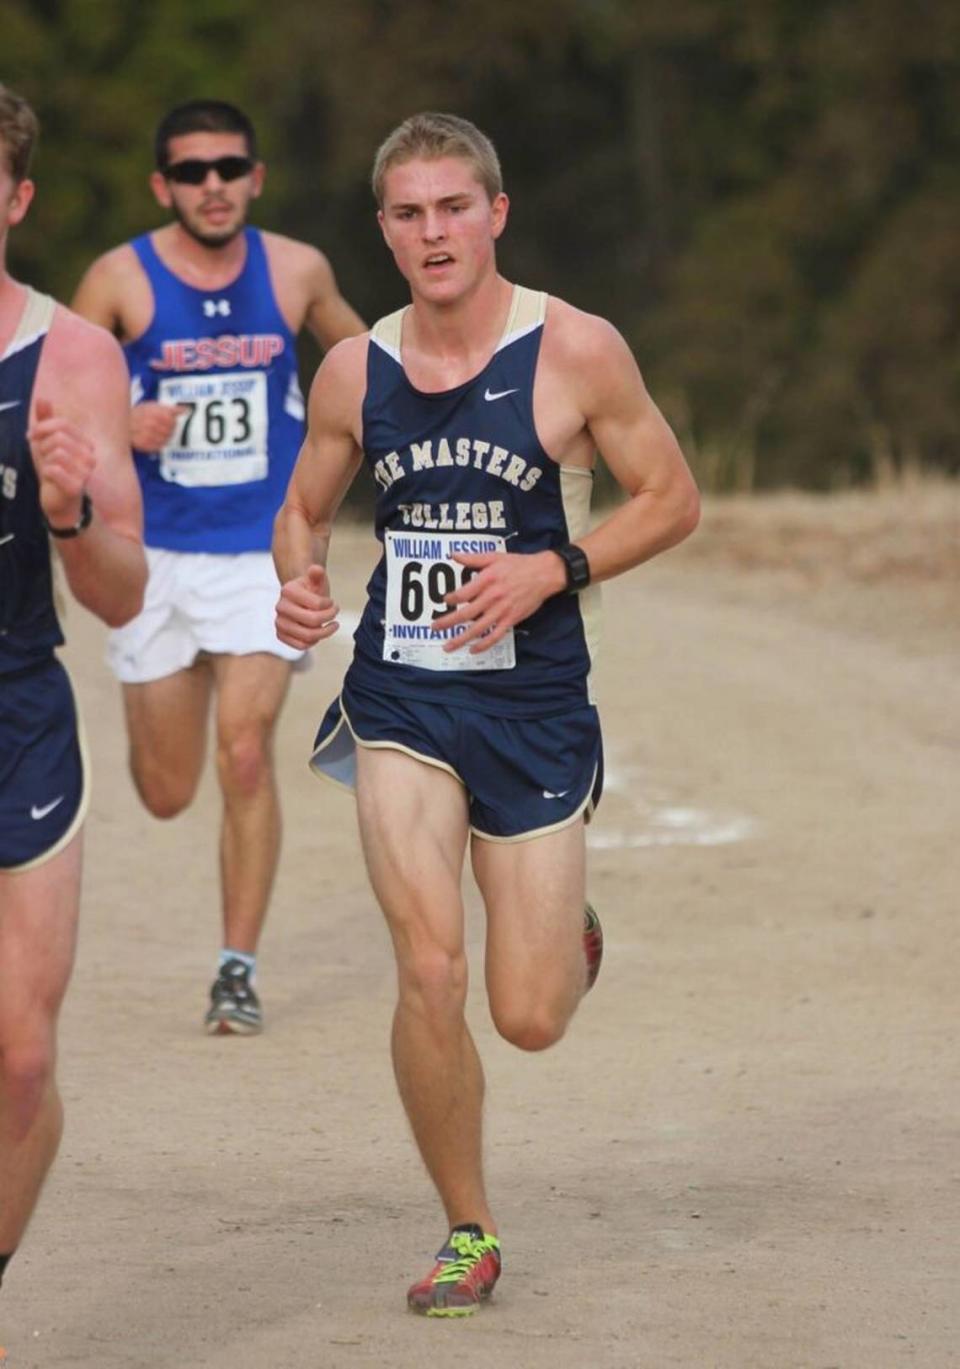 Tobin Bolter graduated from The Master’s University in Santa Clarita, California, in 2017 with a degree in business administration. While in college, Bolter was a member of the cross country and track and field teams. “Tobin was a passionate follower of the lord Jesus Christ,” TMU cross country and track and field coach Zach Schroeder said in a statement. “In life, his desire was to know Christ and make Him known to the world.